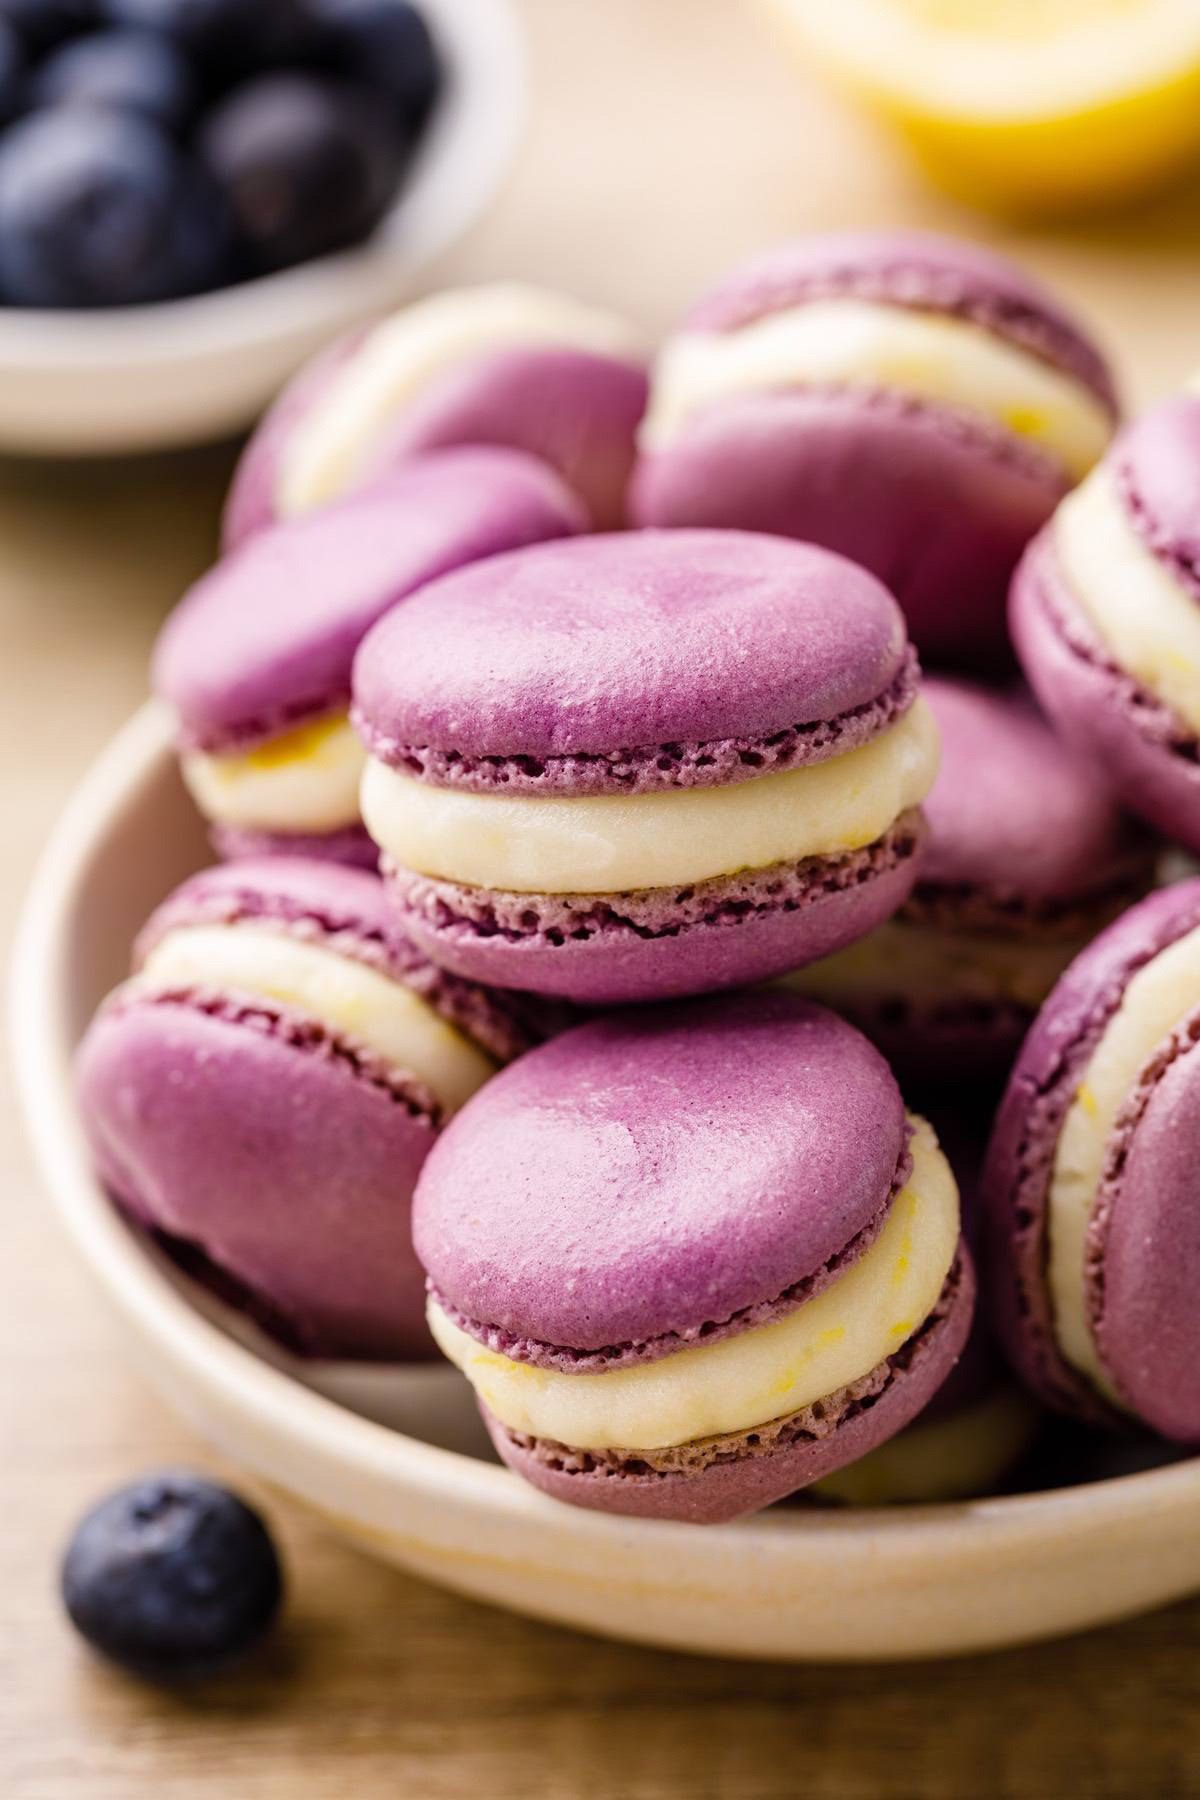 Blueberry Macarons with Lemon Filling